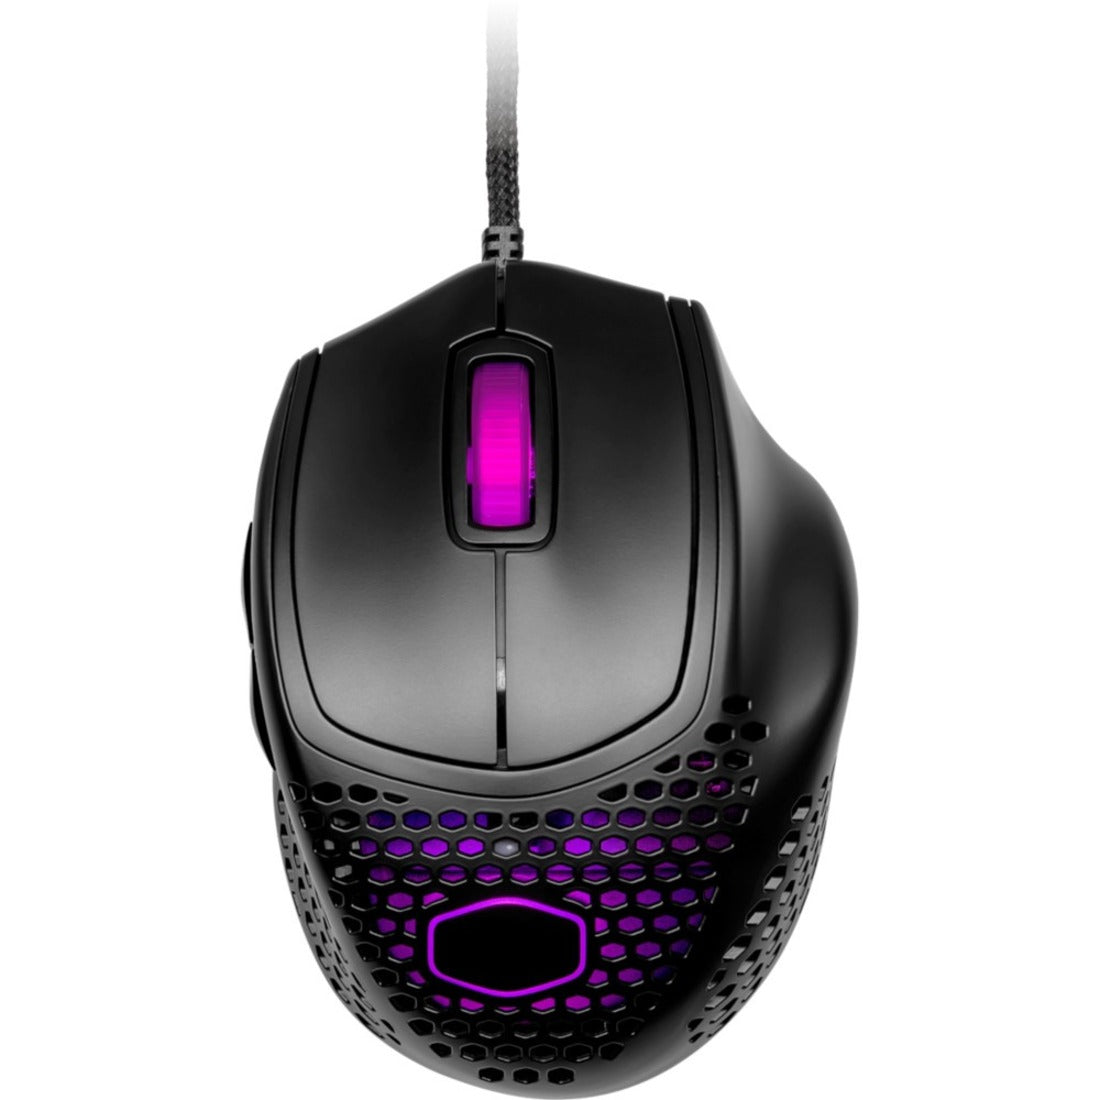 Cooler Master MM-720-KKOL1 MasterMouse MM720 Gaming Mouse, Ergonomic Fit, 16000 dpi, 2 Year Warranty